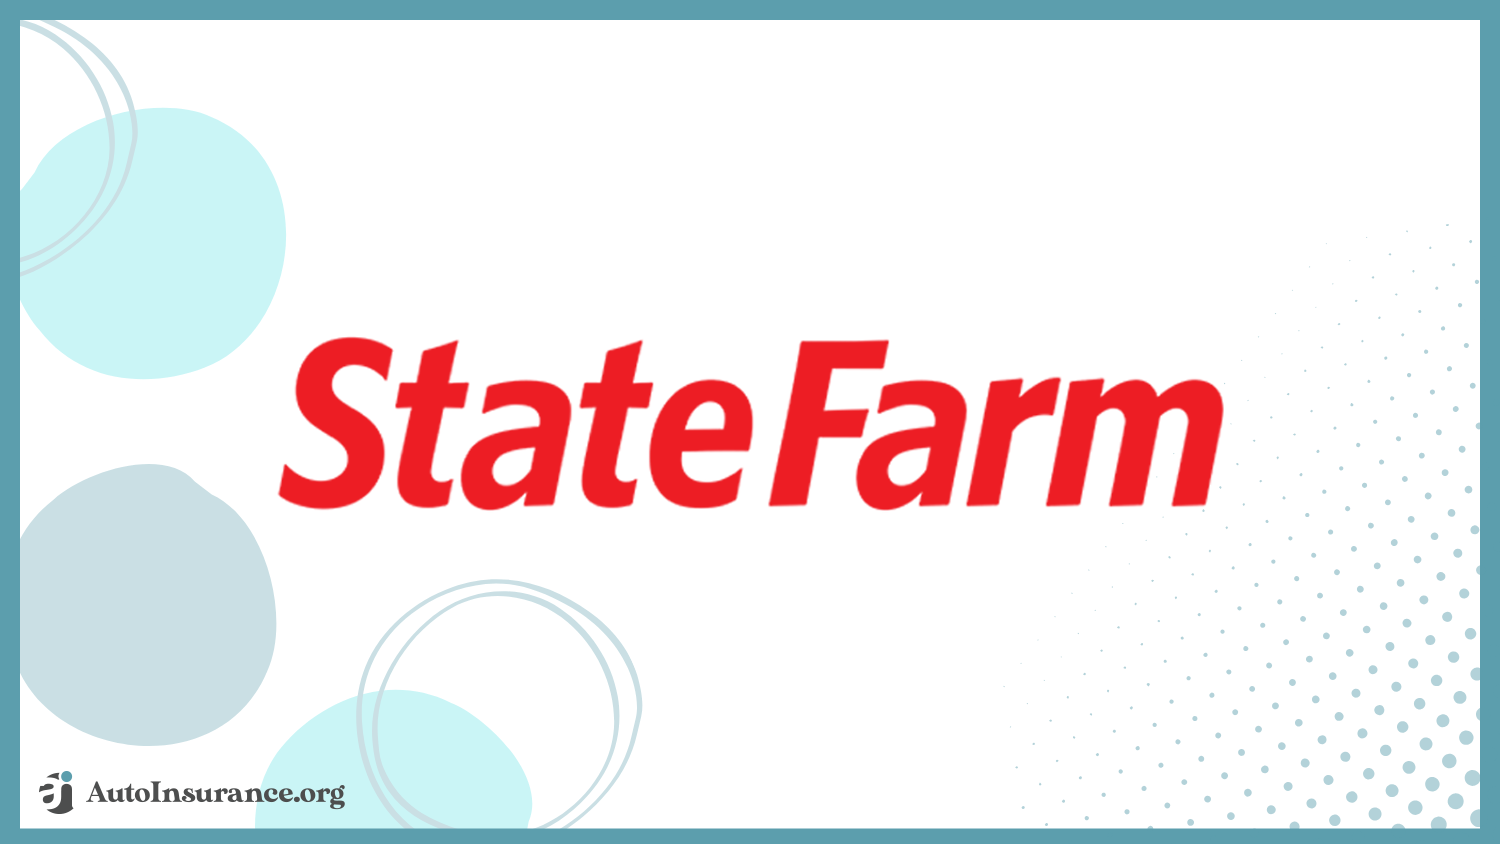 State Farm: Best Auto Insurance for a Student Away at College